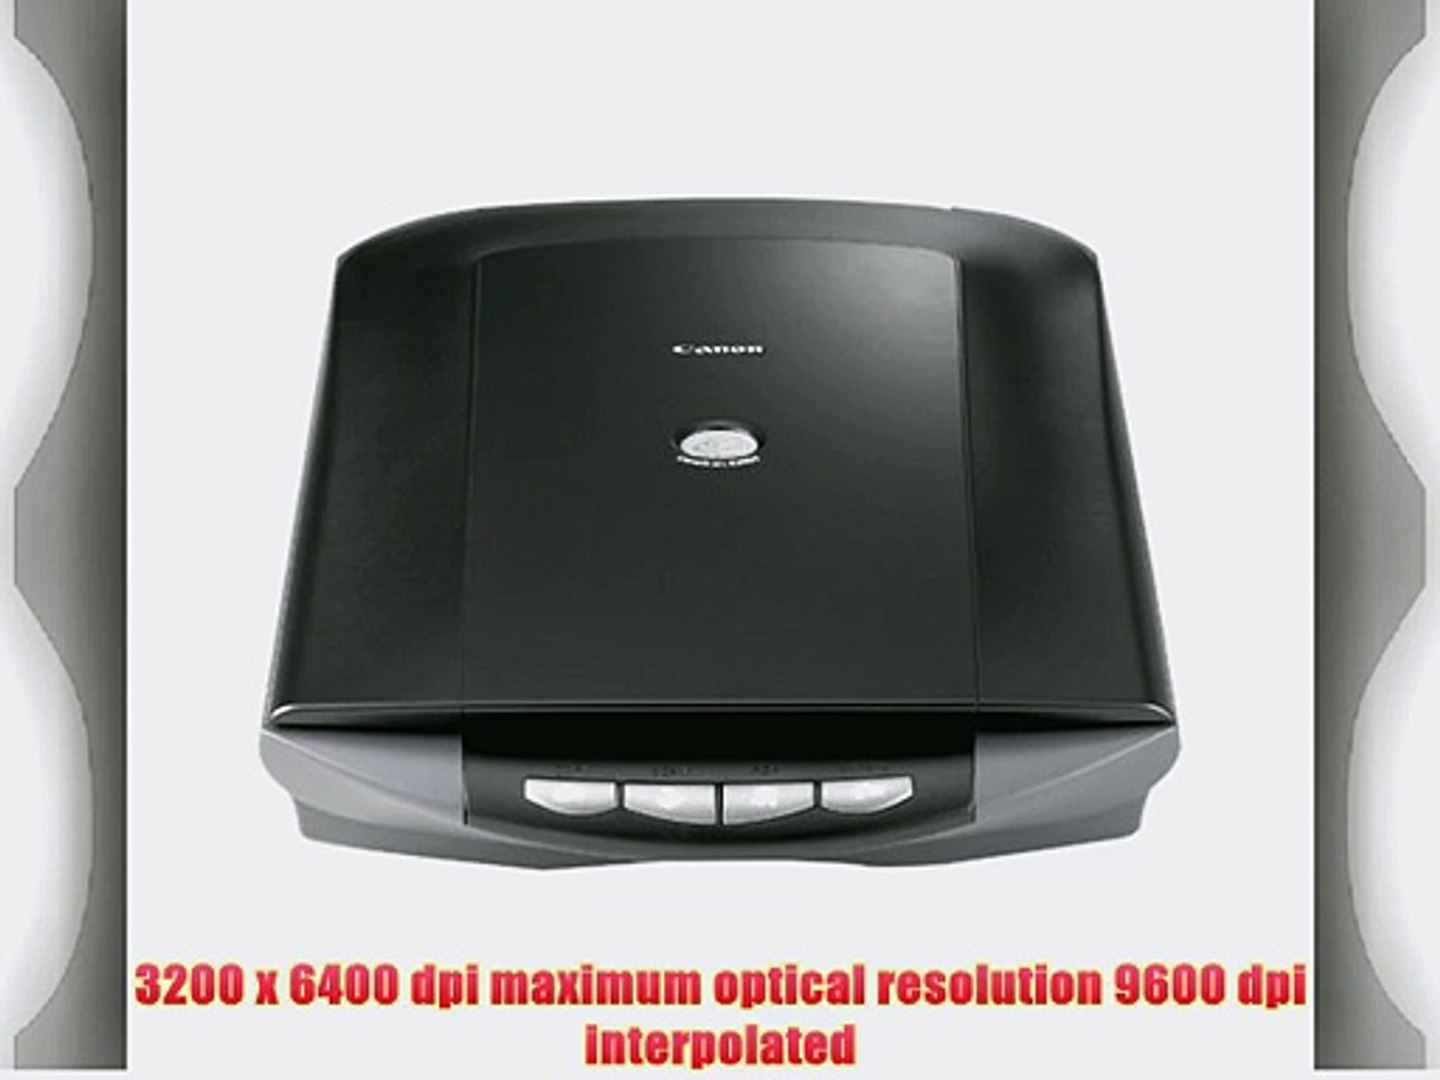 Canon CanoScan 4200F Flatbed Scanner - video Dailymotion